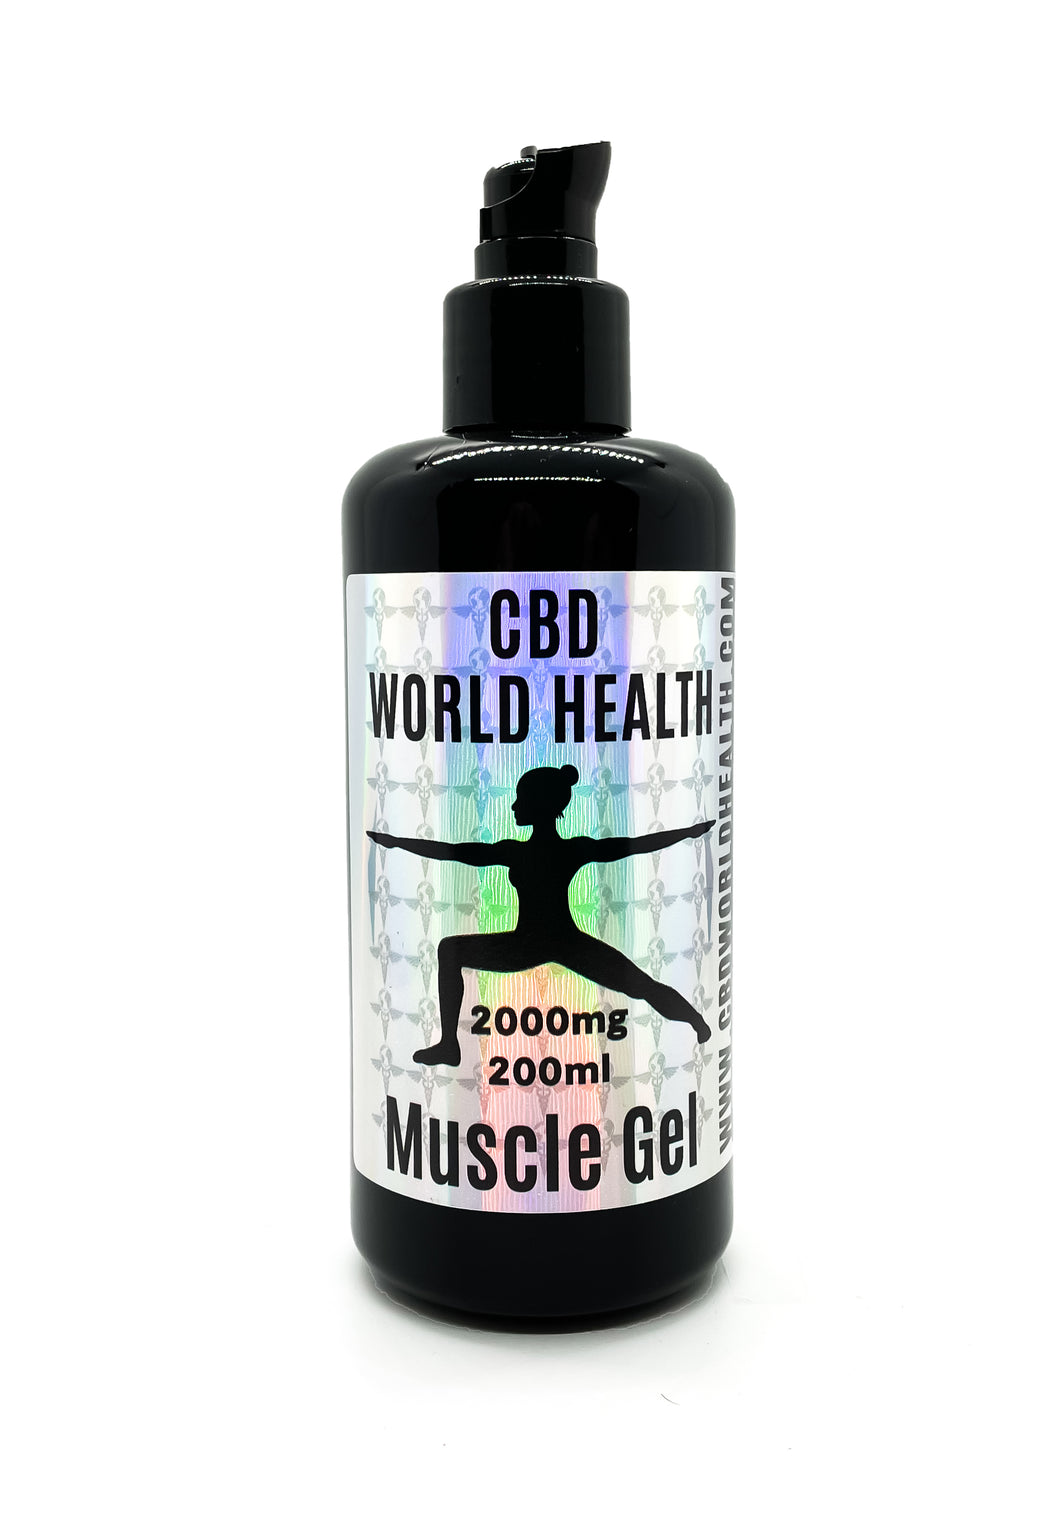 Muscle Gel 200ml (50% off when purchased with a case)